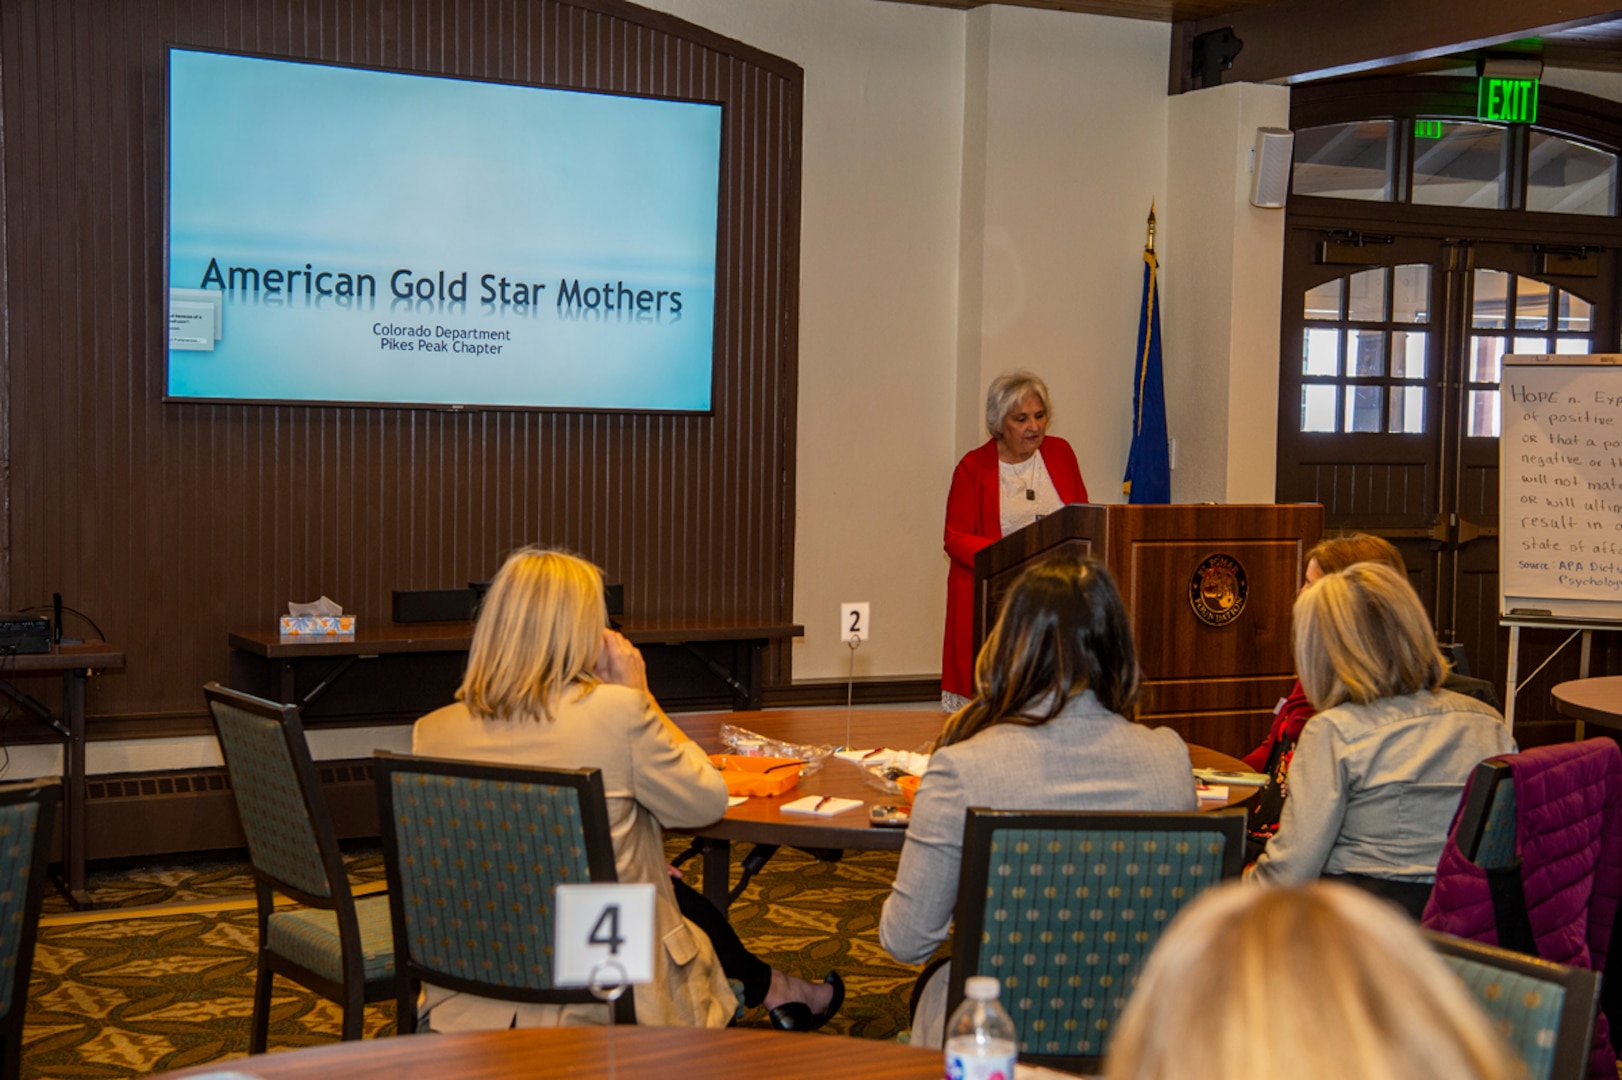 Scoti Springfield Domeij, Pikes Peak Gold Star Mothers vice president, shares the experiences of Gold Star families Oct. 28, 2021, at the Penrose House in Colorado Springs, Colorado, as part of the 2021 Fall Commander's Spouse Conference. Domeij, a Gold Star mother, lost her son U.S. Army Sgt. 1st Class Kristoffer Domeij of the 75th Ranger Regiment during his 14th combat deployment — who is recognized as the most deployed Soldier in American history to be killed in action. The Pikes Peak American Gold Star Mothers organization supports and provides resources to the mothers of those who lost their sons and daughters in service to the country. Scoti Springfield Domeij spoke to USSPACECOM's headquarters and component senior leaders’ spouses during the event, which was hosted in conjunction with the Fall Commander's Conference. Angie Dickinson, wife of Army Gen. James Dickinson, USSPACECOM commander, discussed strategies to enhance readiness and personal and family resiliency. Ensuring military families have these tools contributes to collective security and prosperity as USSPACECOM warfighters enable the preservation of the modern American way of life.